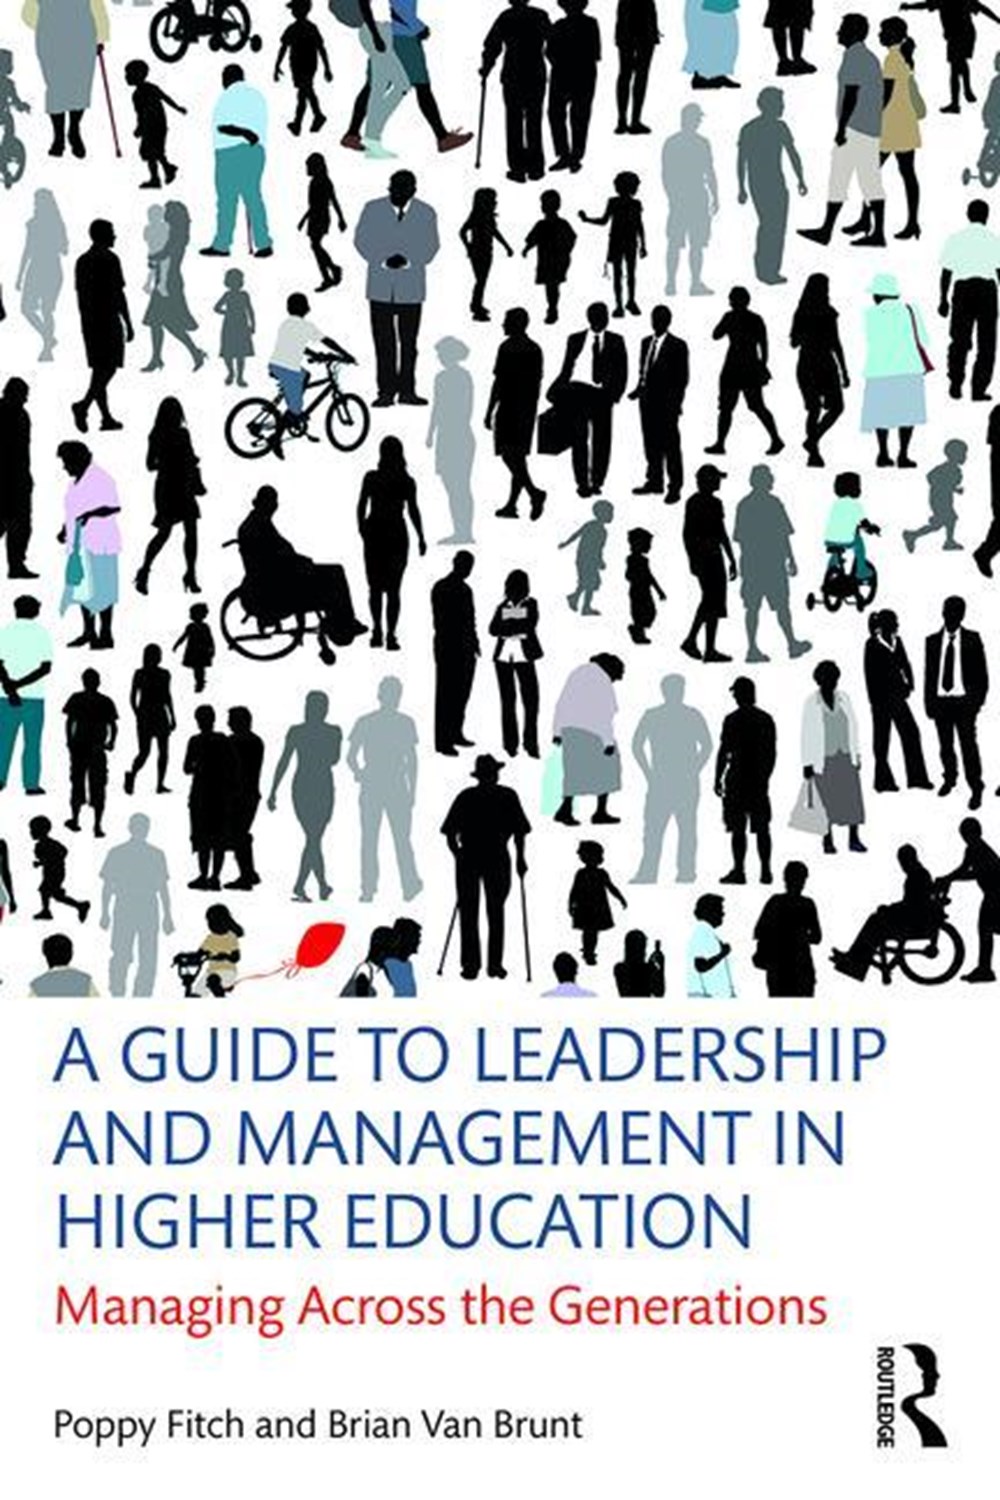 Guide to Leadership and Management in Higher Education: Managing Across the Generations